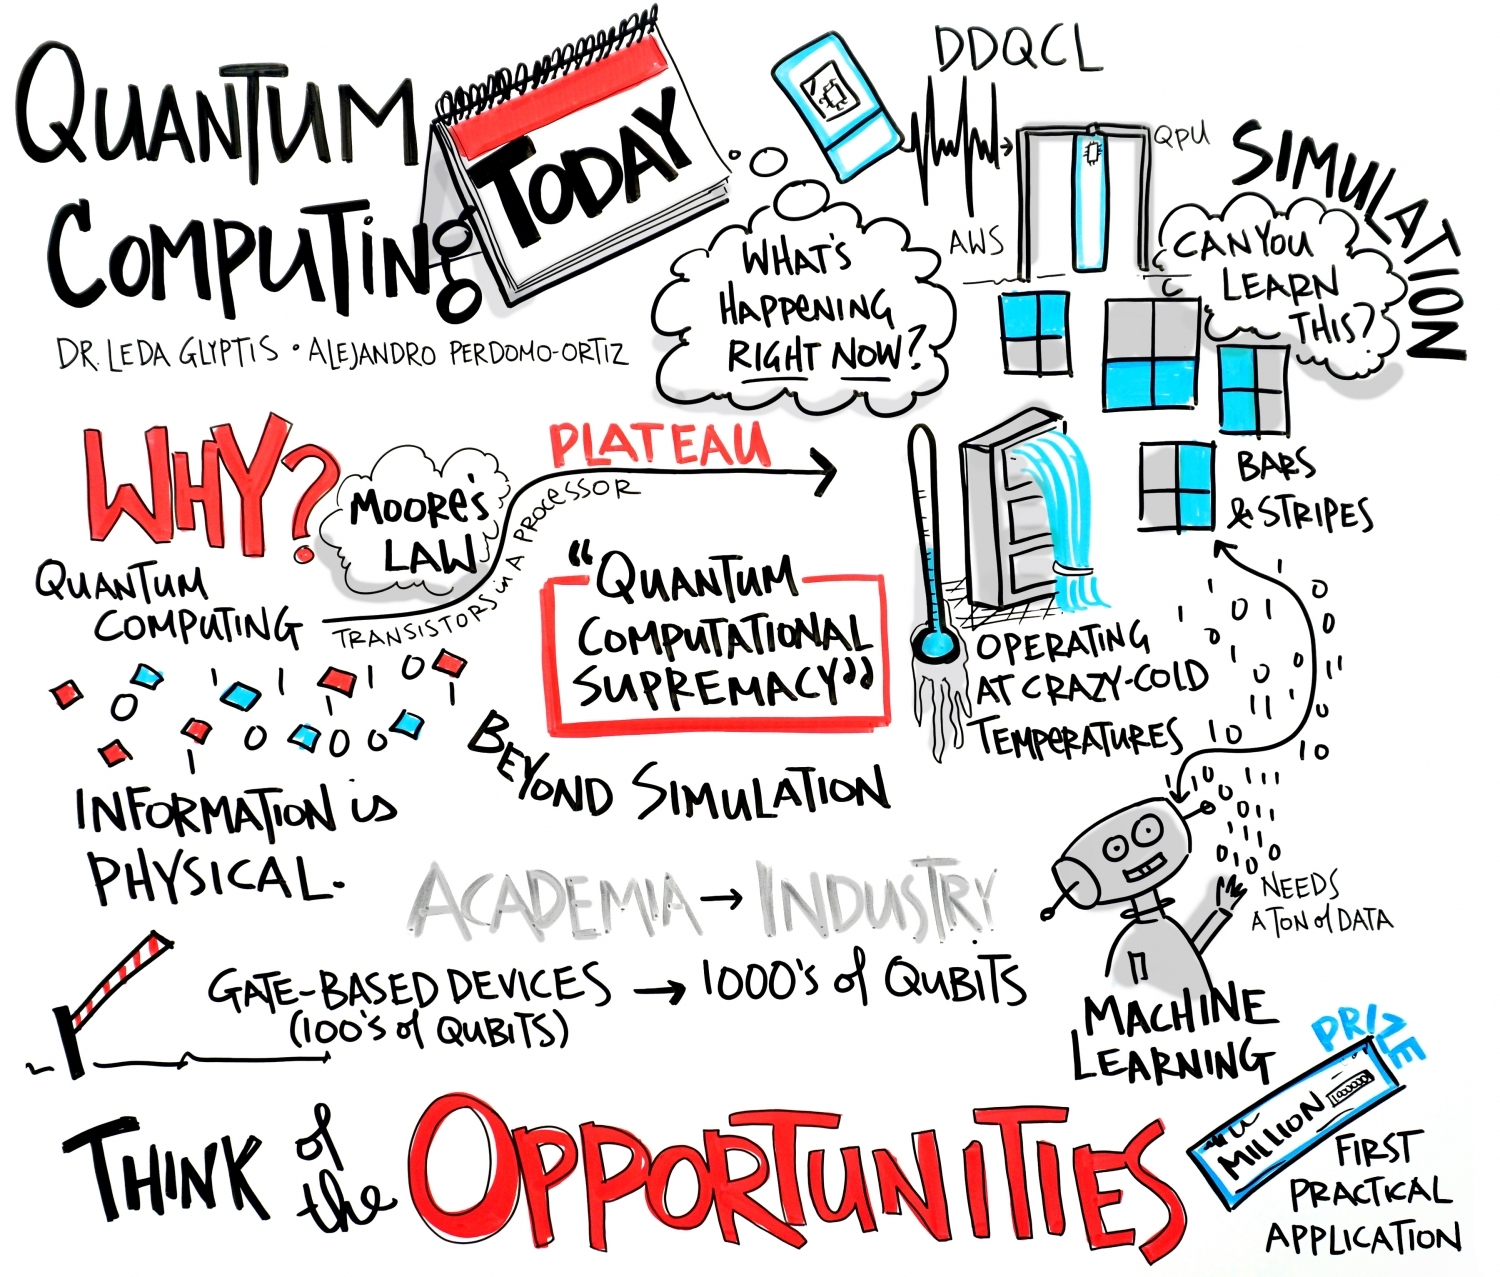 graphic recording facilitation creativity conferences conference financial services banking blockchain graphics consultants communication